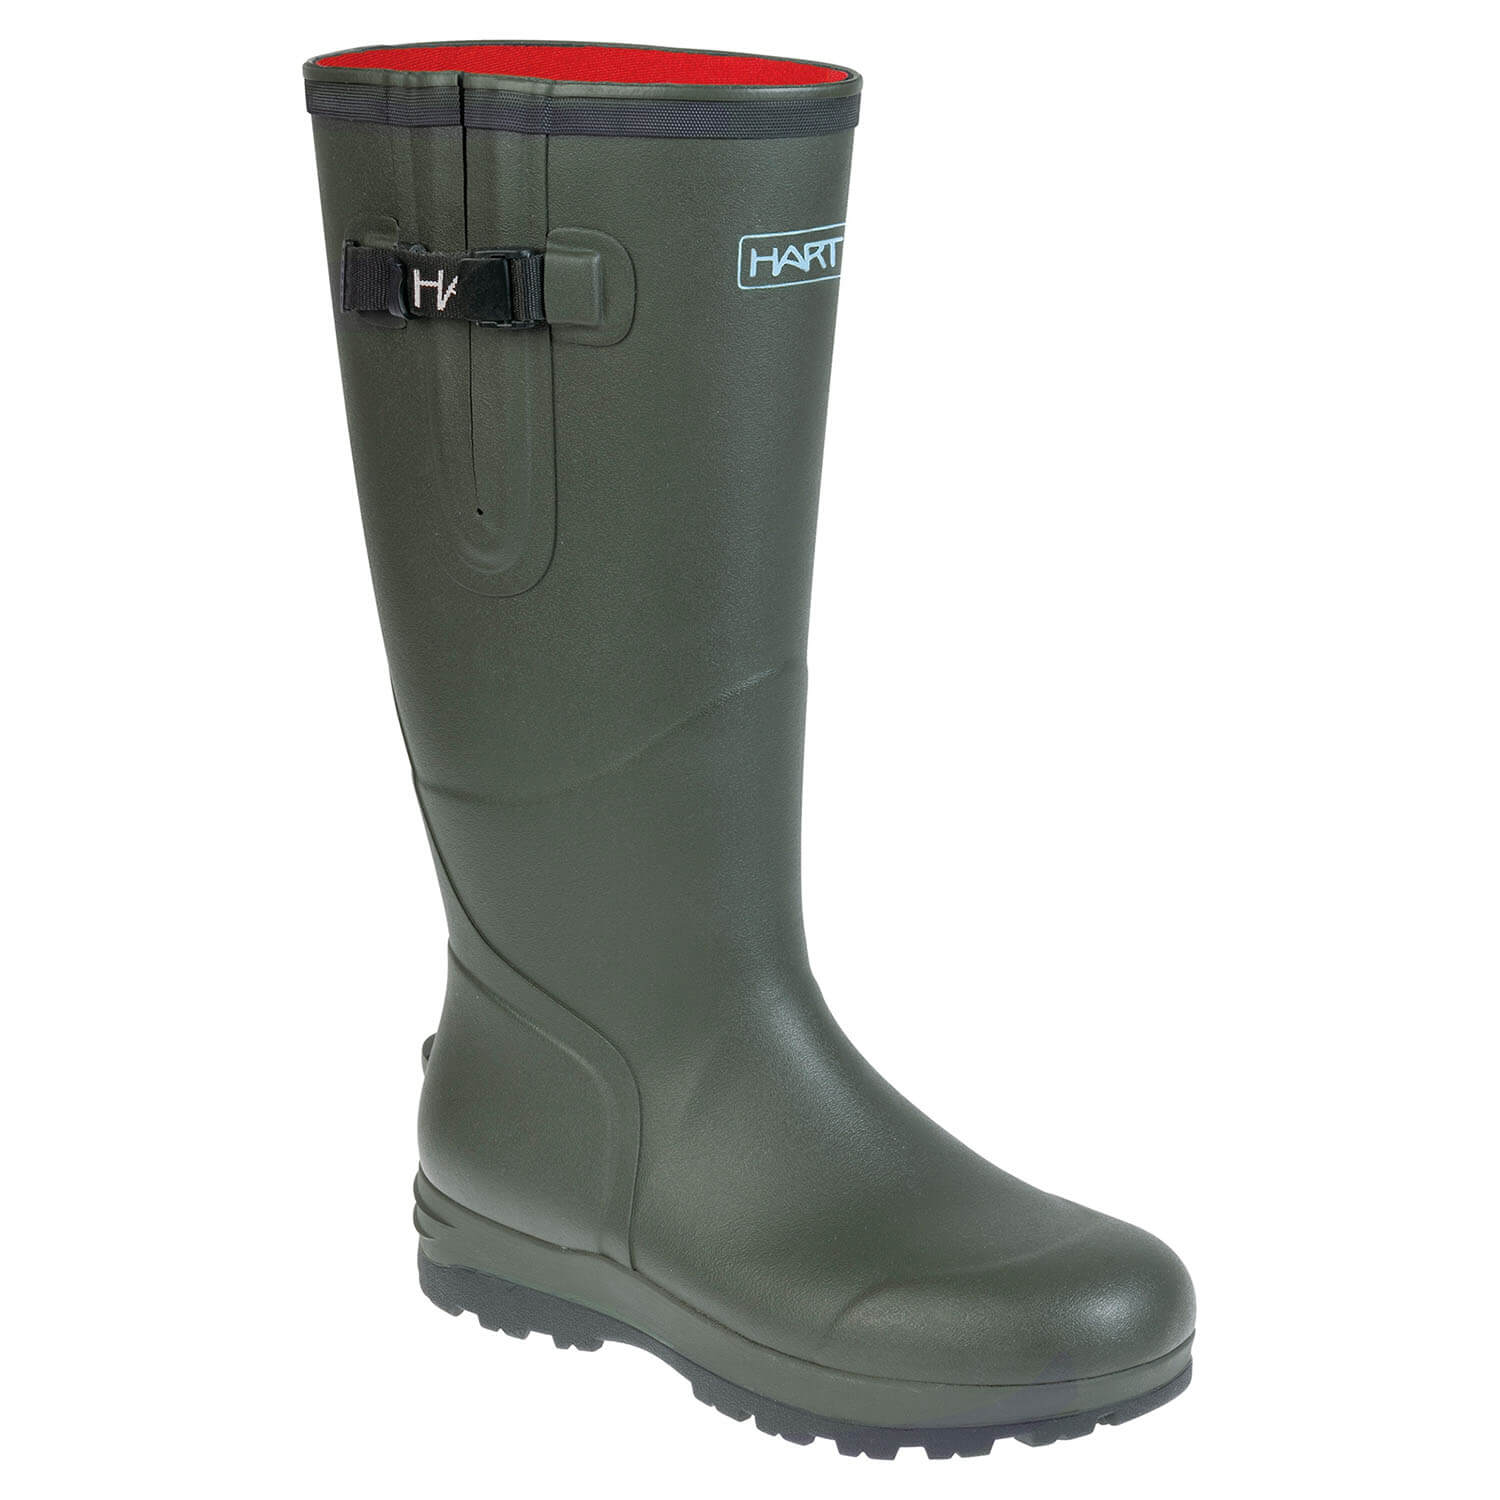 Hart Rubber Boots Entry - Rubber Boots